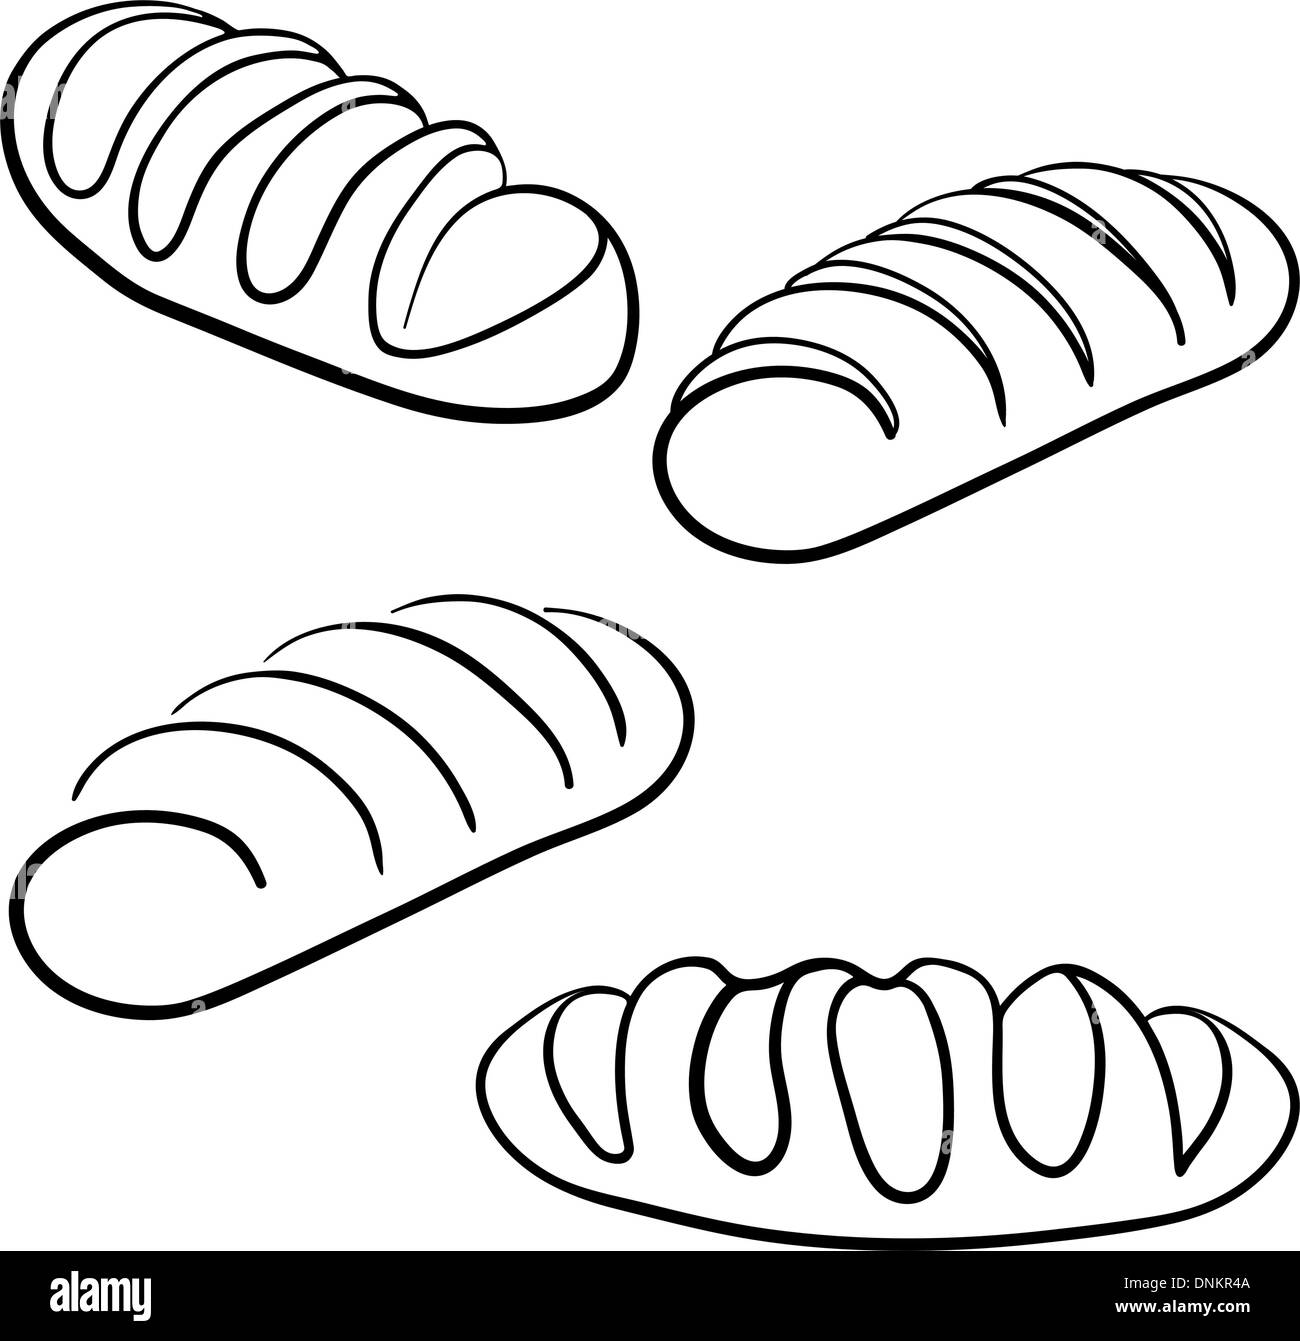 loaf of bread Stock Vector